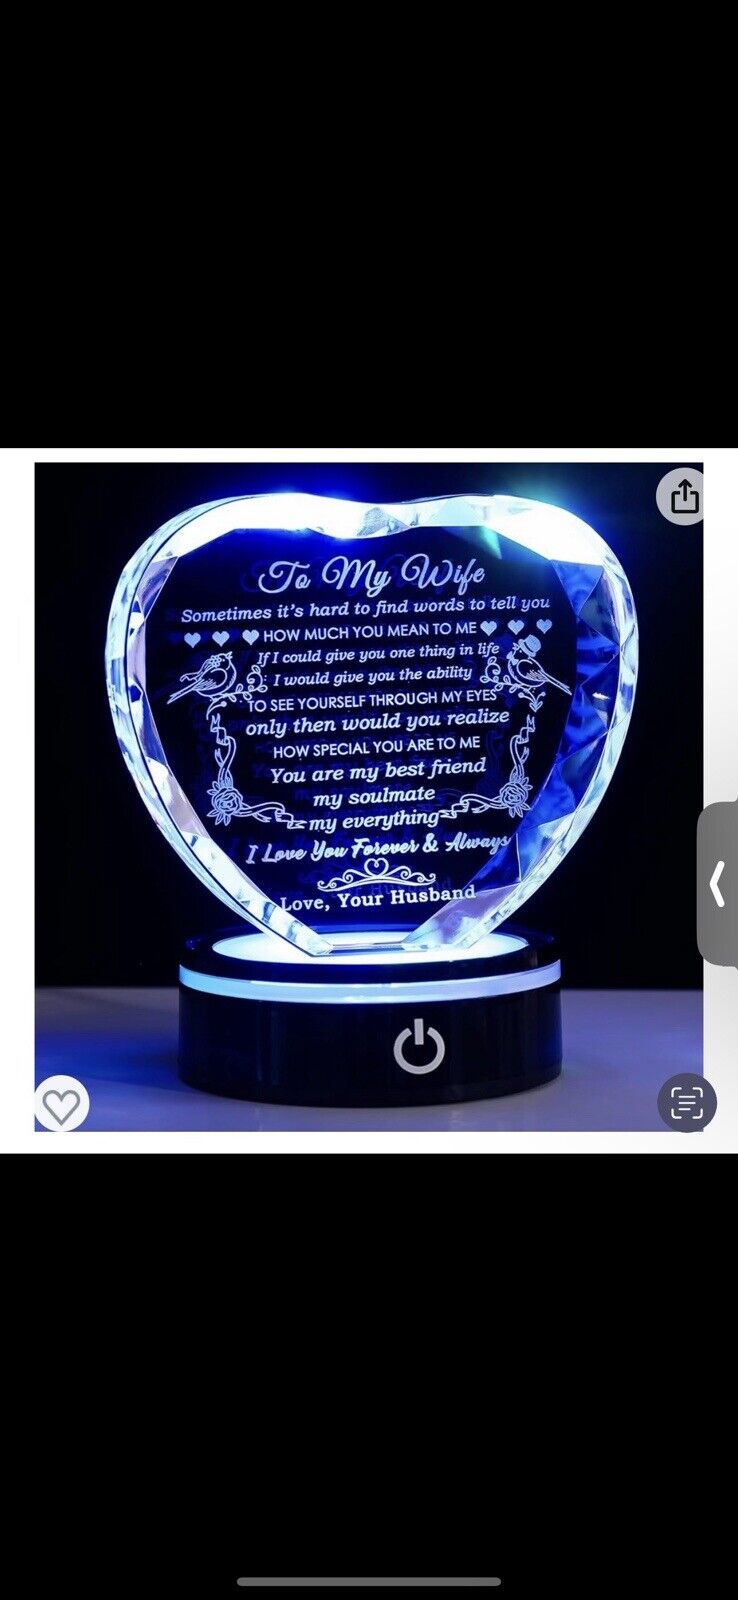 Gifts for Wife with Colorful LED Base I Love You Gifts for Her from Husband Best